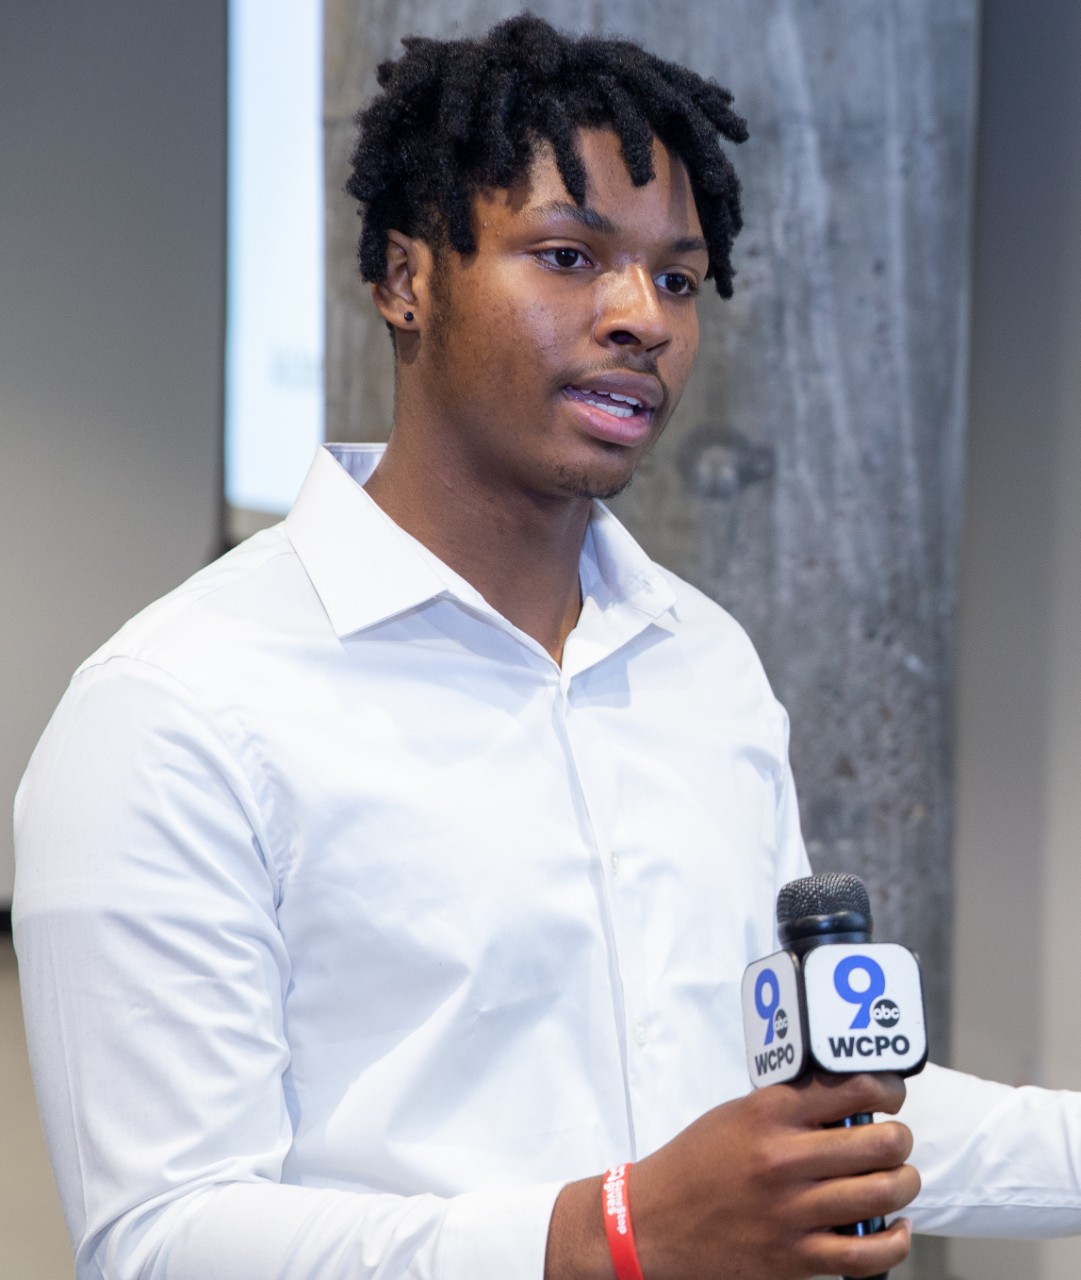 UC student Grant Chapel holds a WCPO-TV mic during an interview.